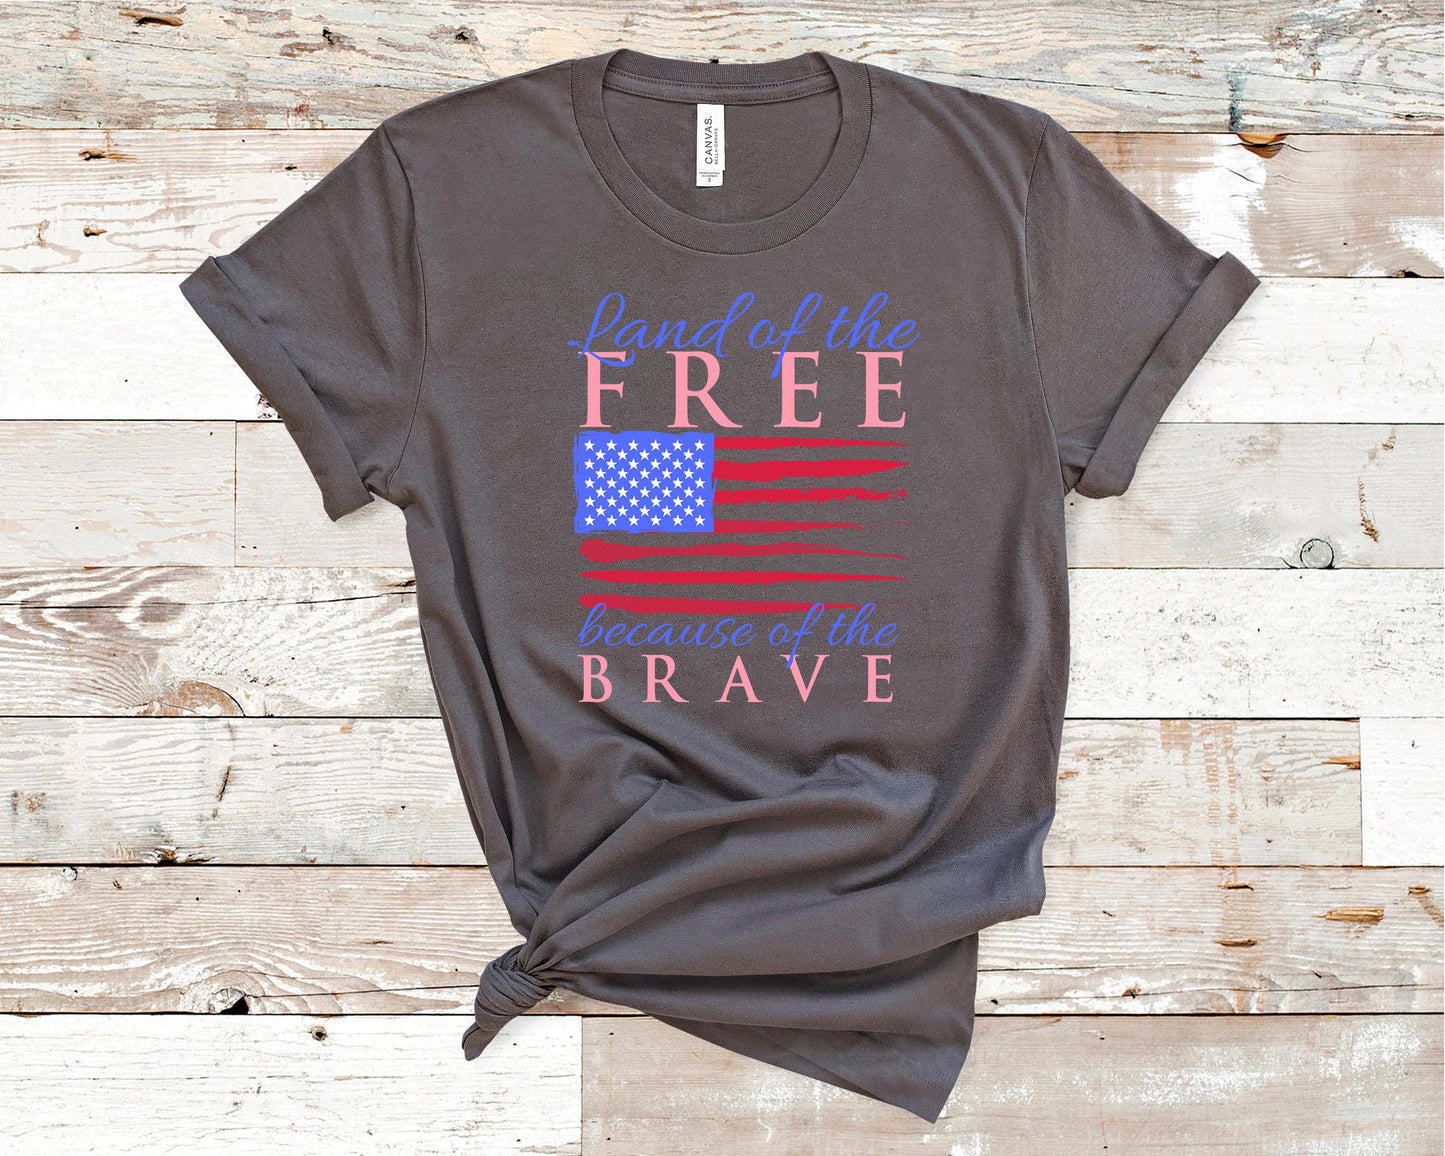 Land of the Free Because of the Brave - Independence Day